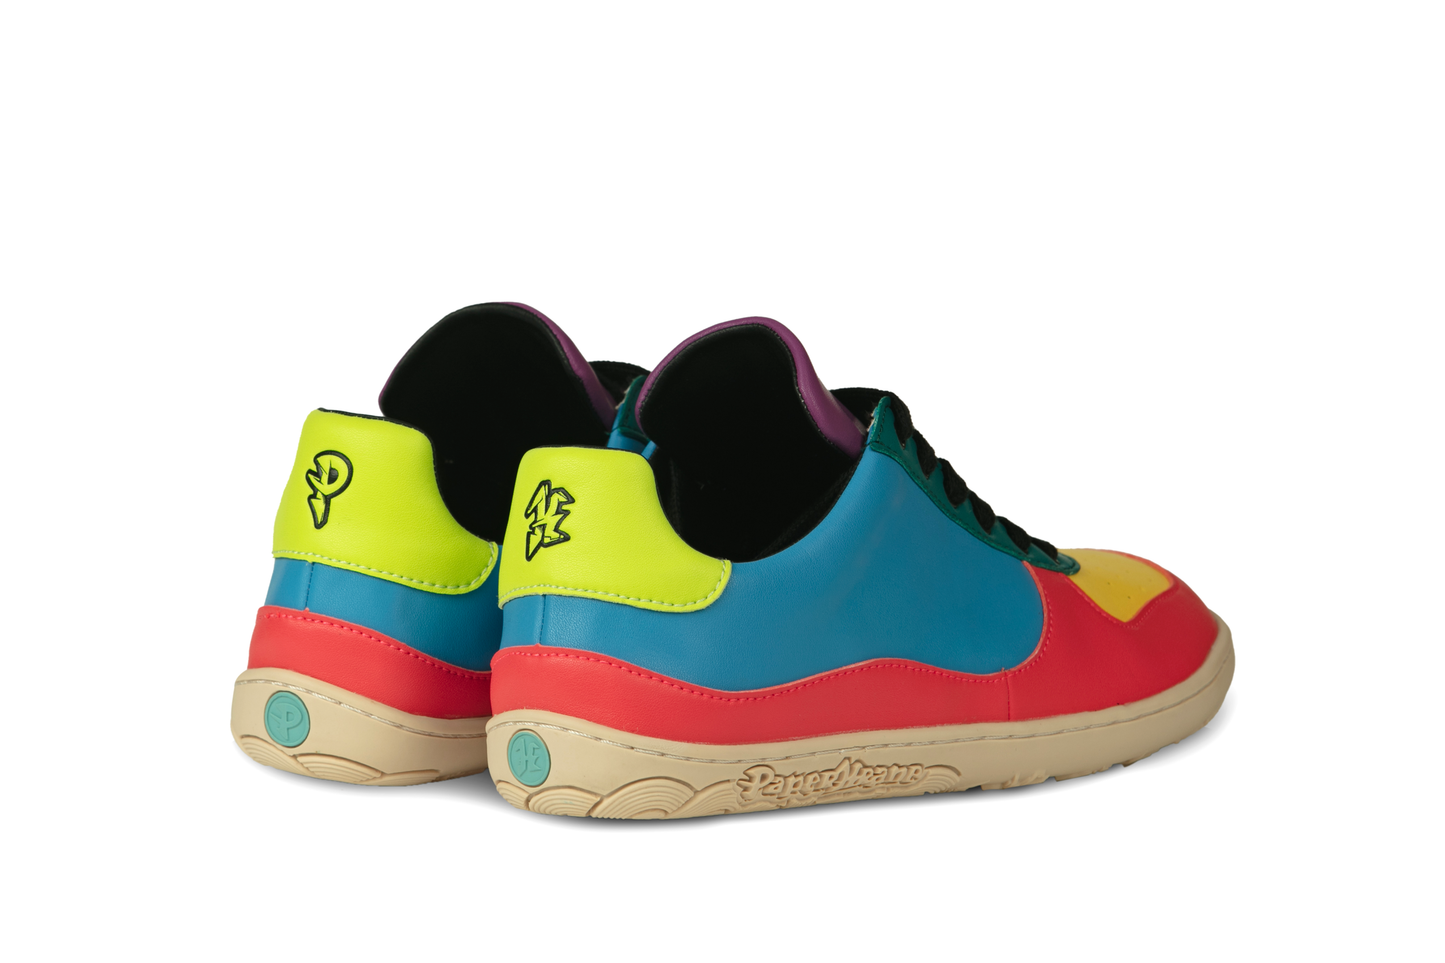 BACK VIEW OF A PAIR OF VEGGIE LOWS. LIME GREEN, BLUE AND RED ON A BEIGE SOLE, CAN SEE A LITTLE YELLOW AND TEAL DETAILS TOO